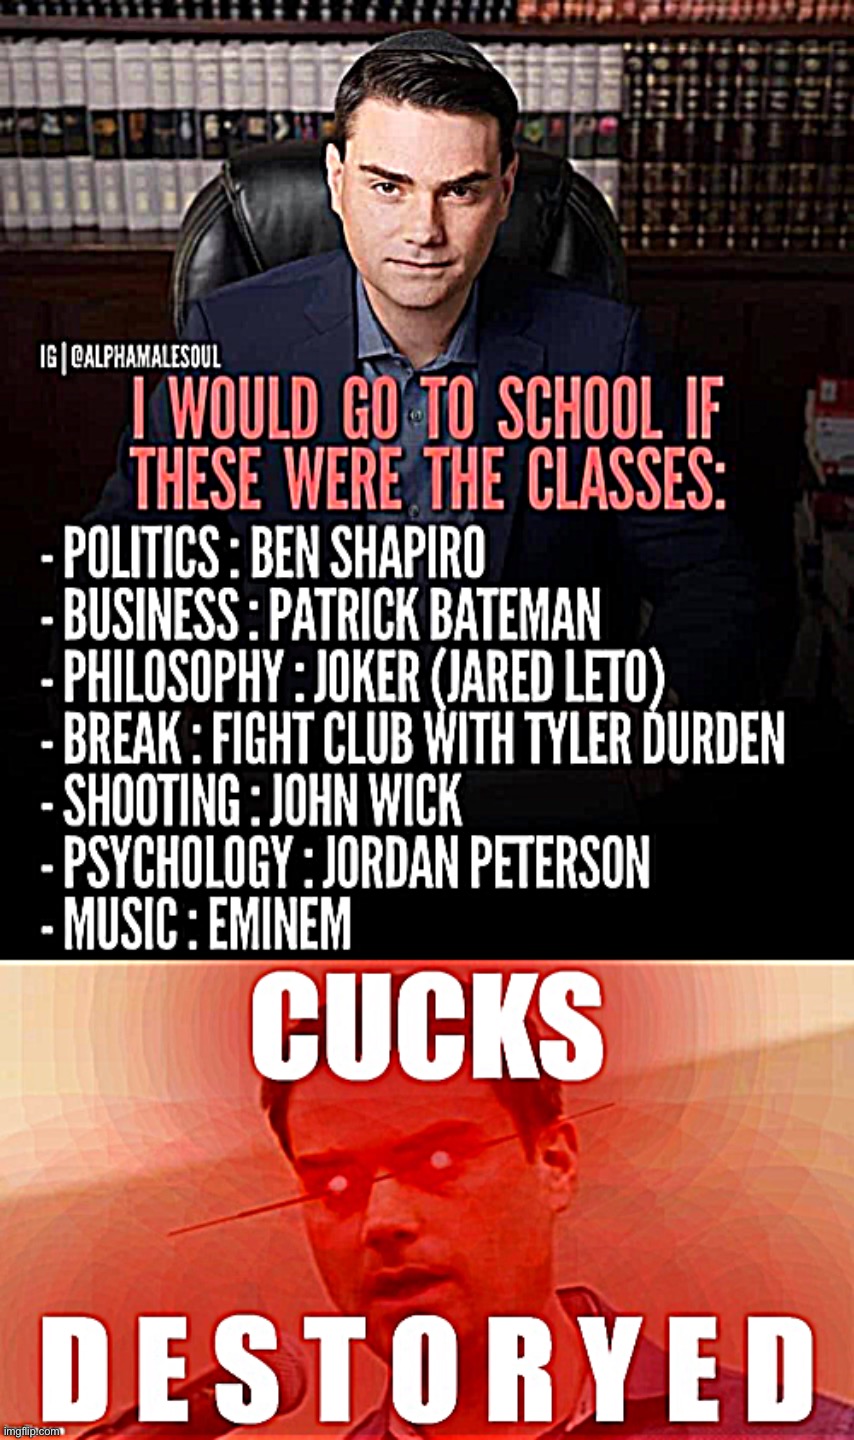 i would go to college if they had professors who actually knew something & weren’t trying to indoctrinate. | image tagged in ben shapiro classes,ben shapiro cucks destoryed,college,university,cucks,destoryed | made w/ Imgflip meme maker